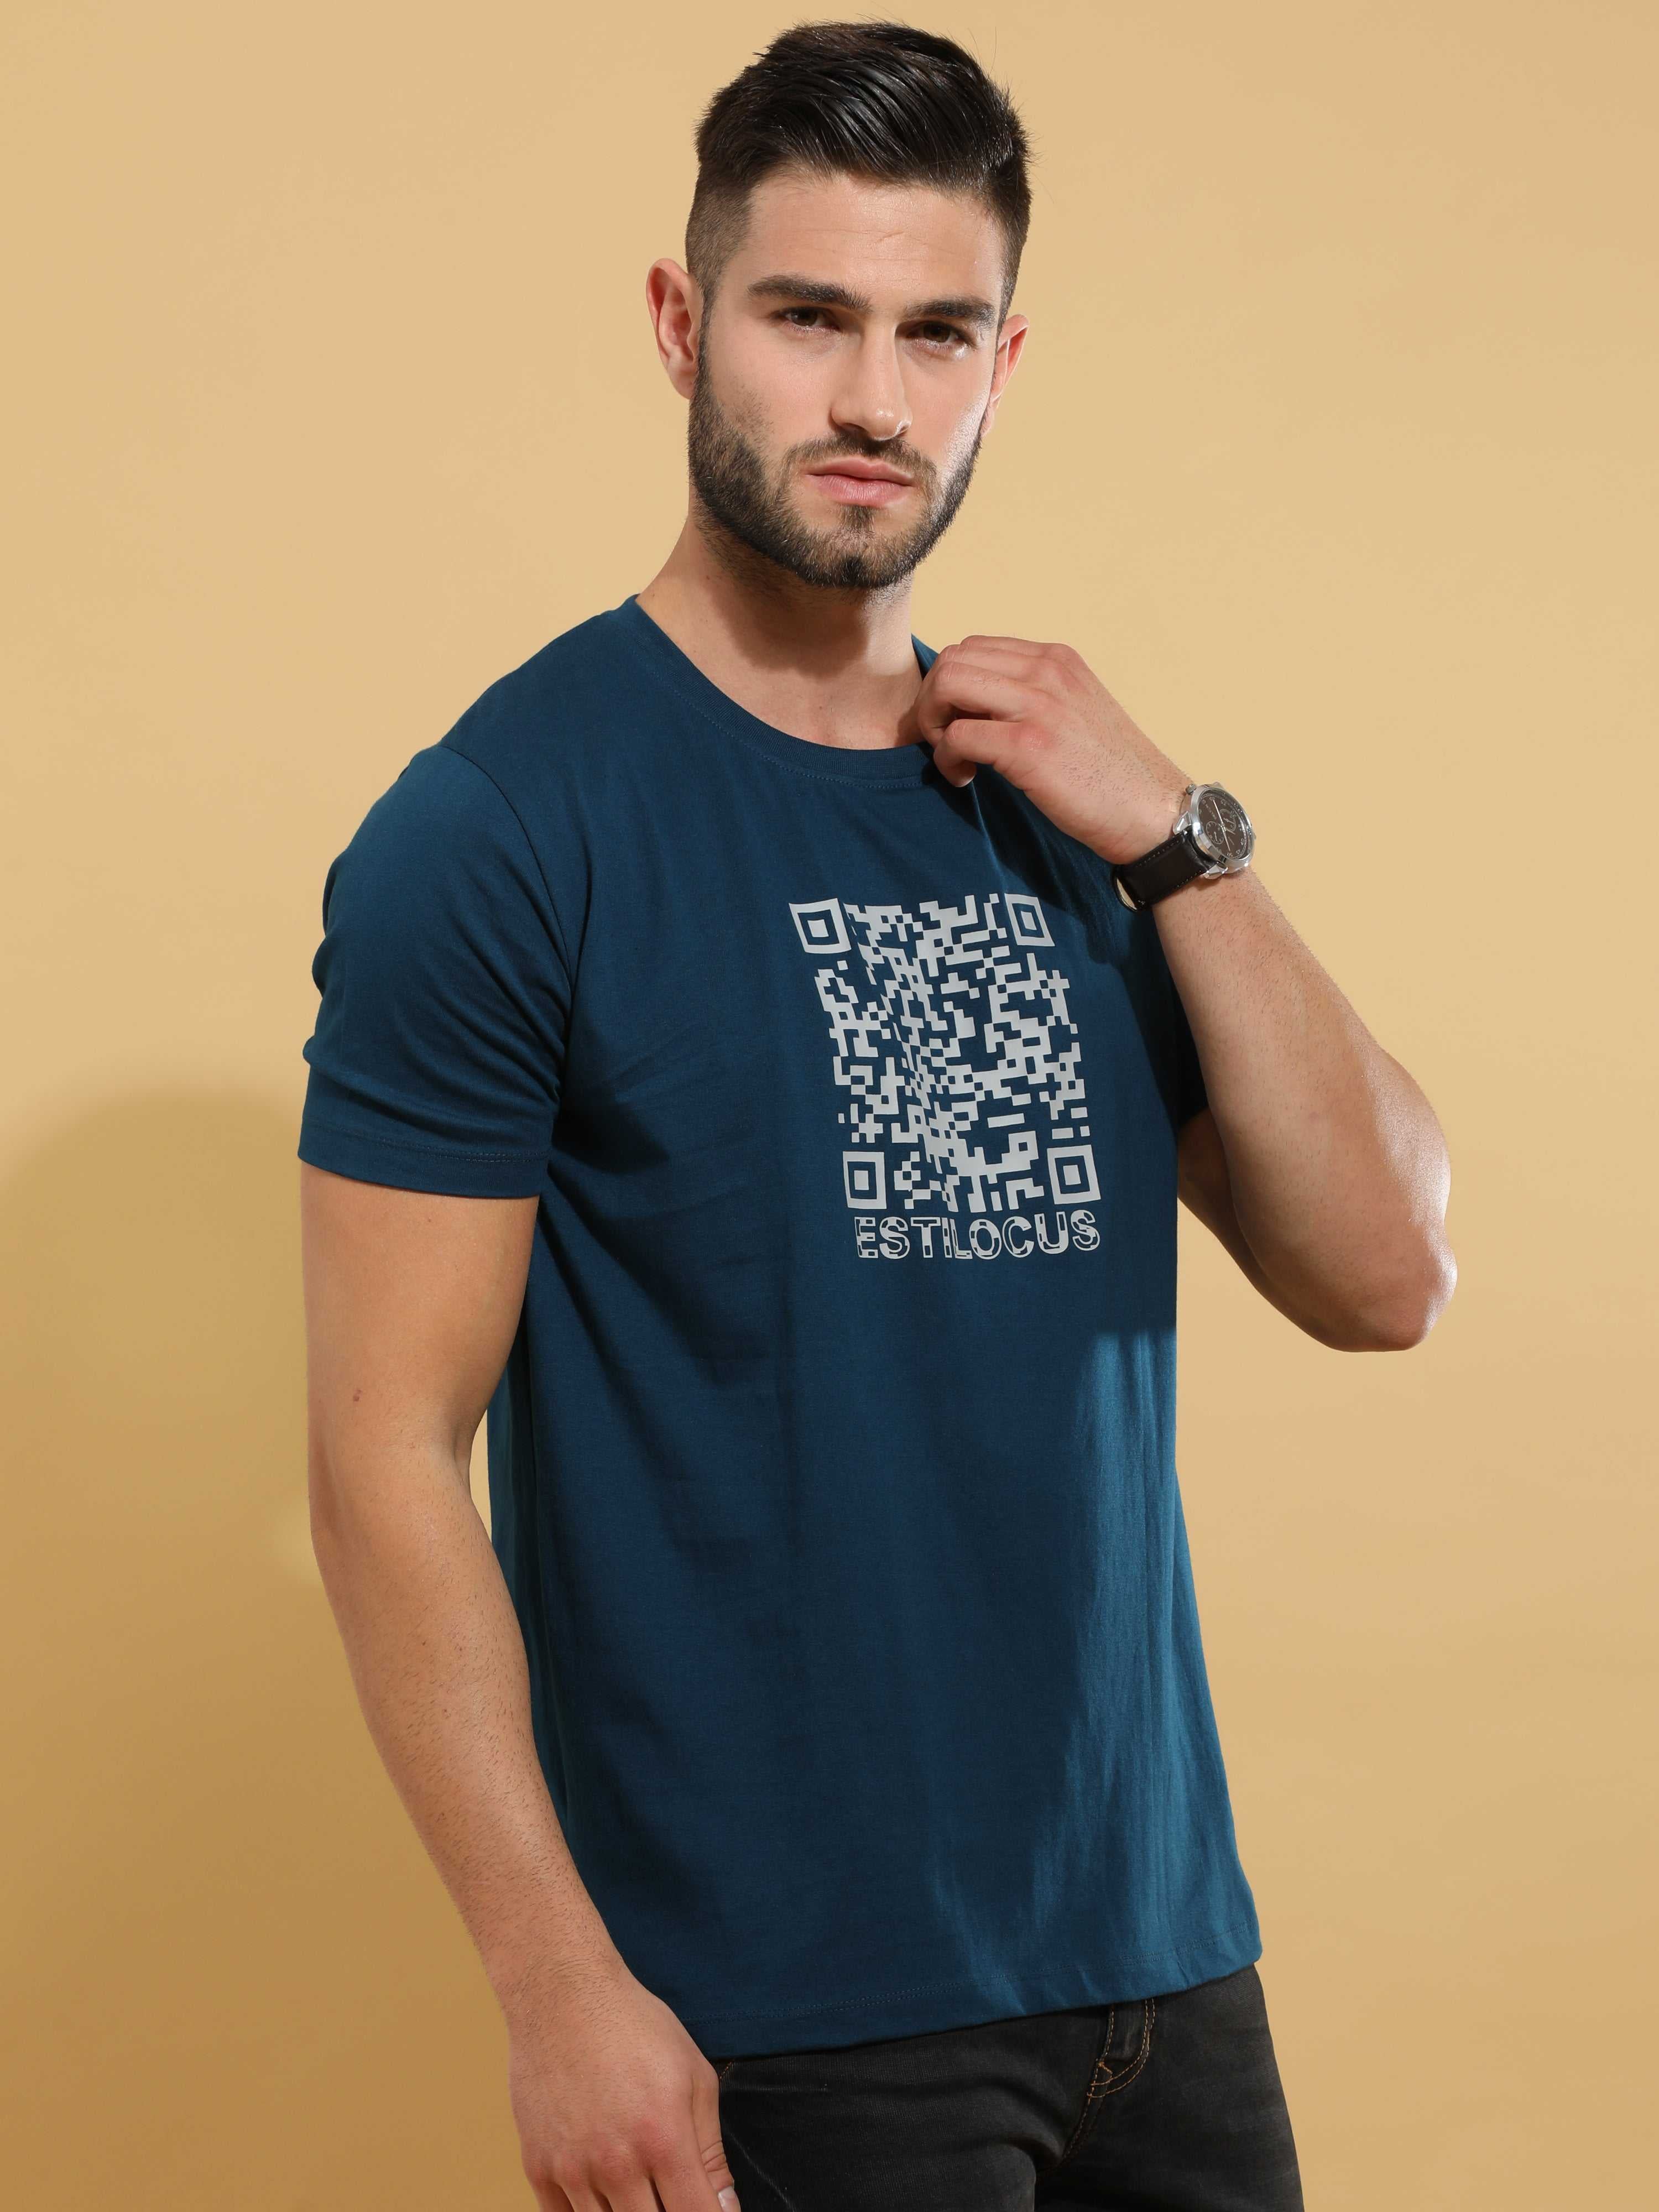 Teal Barcode Crewneck T-Shirt shop online at Estilocus. This pure cotton printed T-shirt is a stylish go-to for laidback days. Cut in a comfy regular fit. • 100% Cotton knitted interlock 190GSM• Bio washed fabric• Round neck T-shirt • Half sleeve • Suits